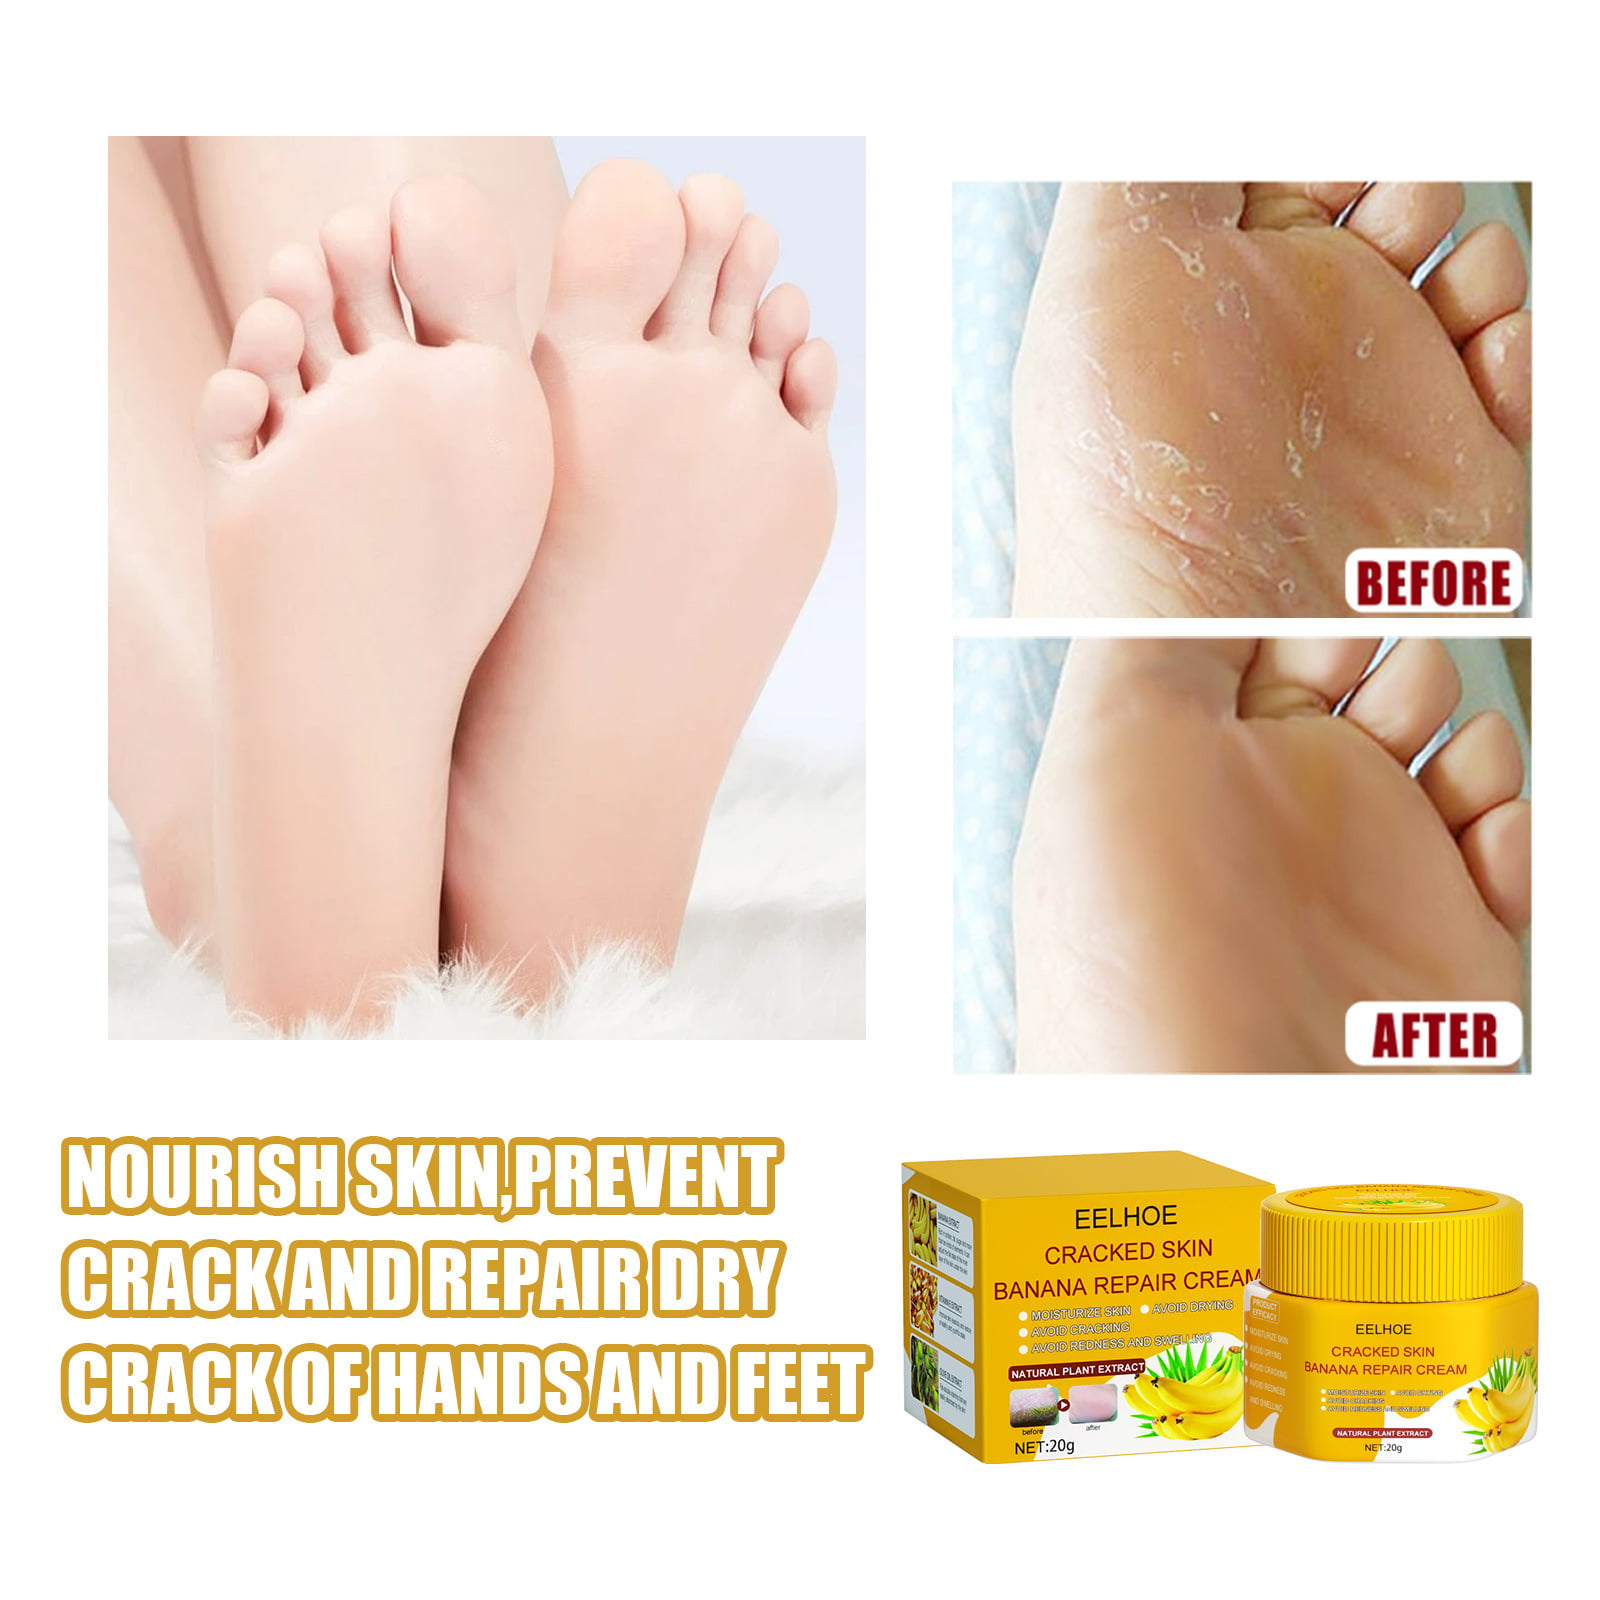 RABENDA Foot Care Cream For Rough, Dry and Cracked Heel - Price in India,  Buy RABENDA Foot Care Cream For Rough, Dry and Cracked Heel Online In  India, Reviews, Ratings & Features |